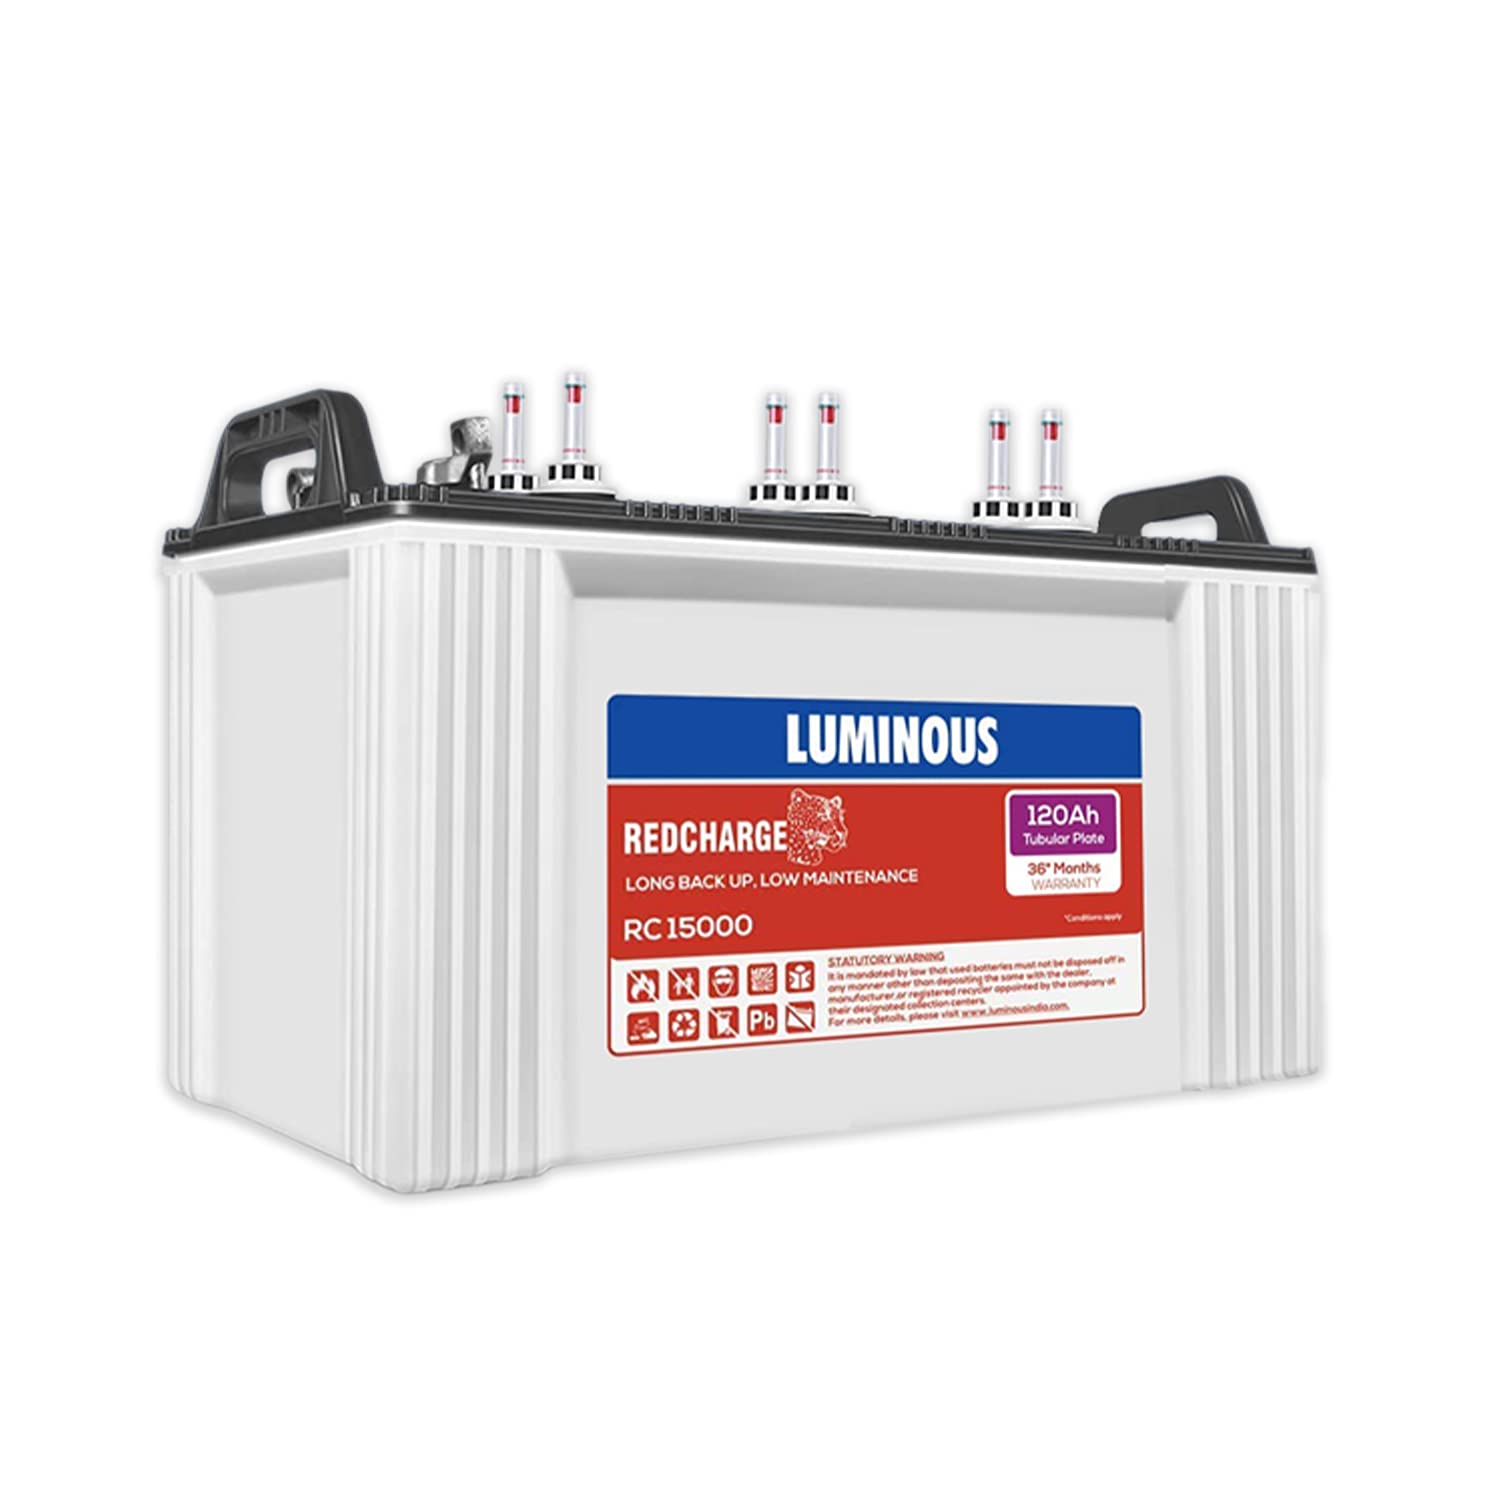 Latest Selling Inverter Battery in Nigeria 2023 (Buying Guide) nigeriantech.com.ng